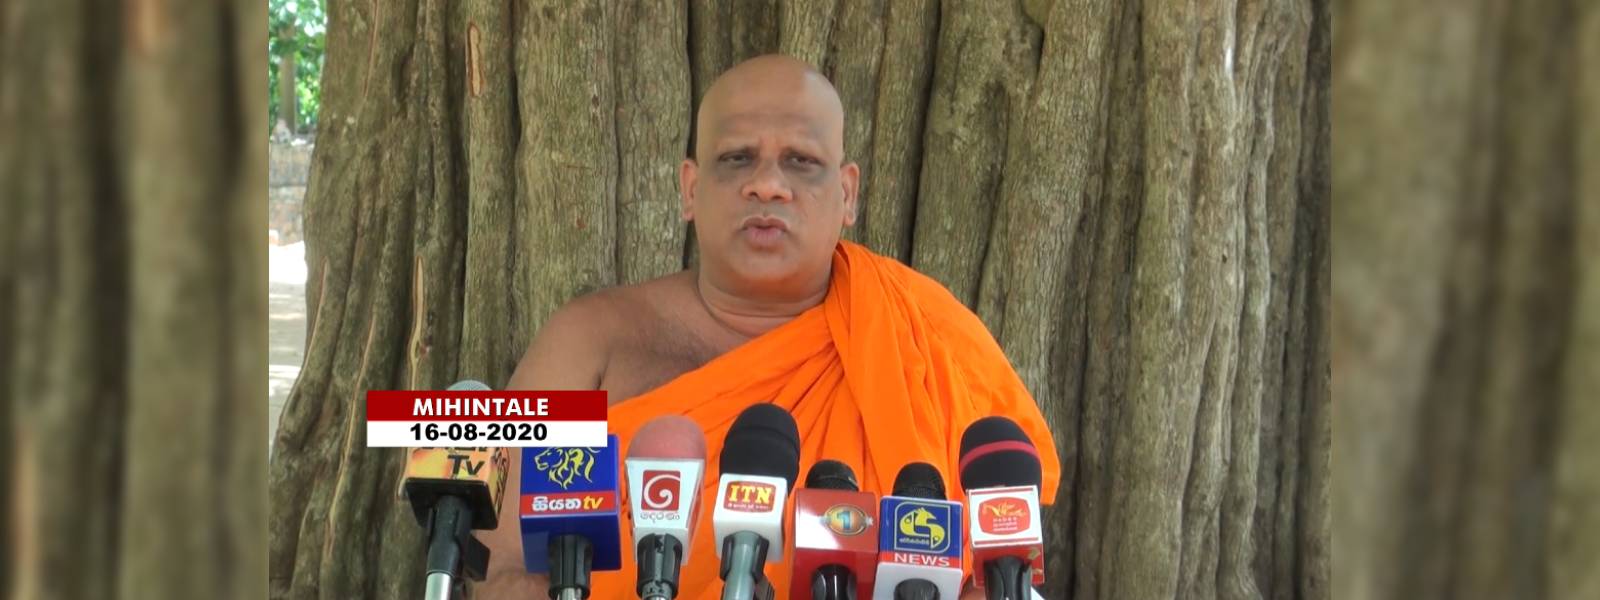 Don't vote for monks, chief incumbent says